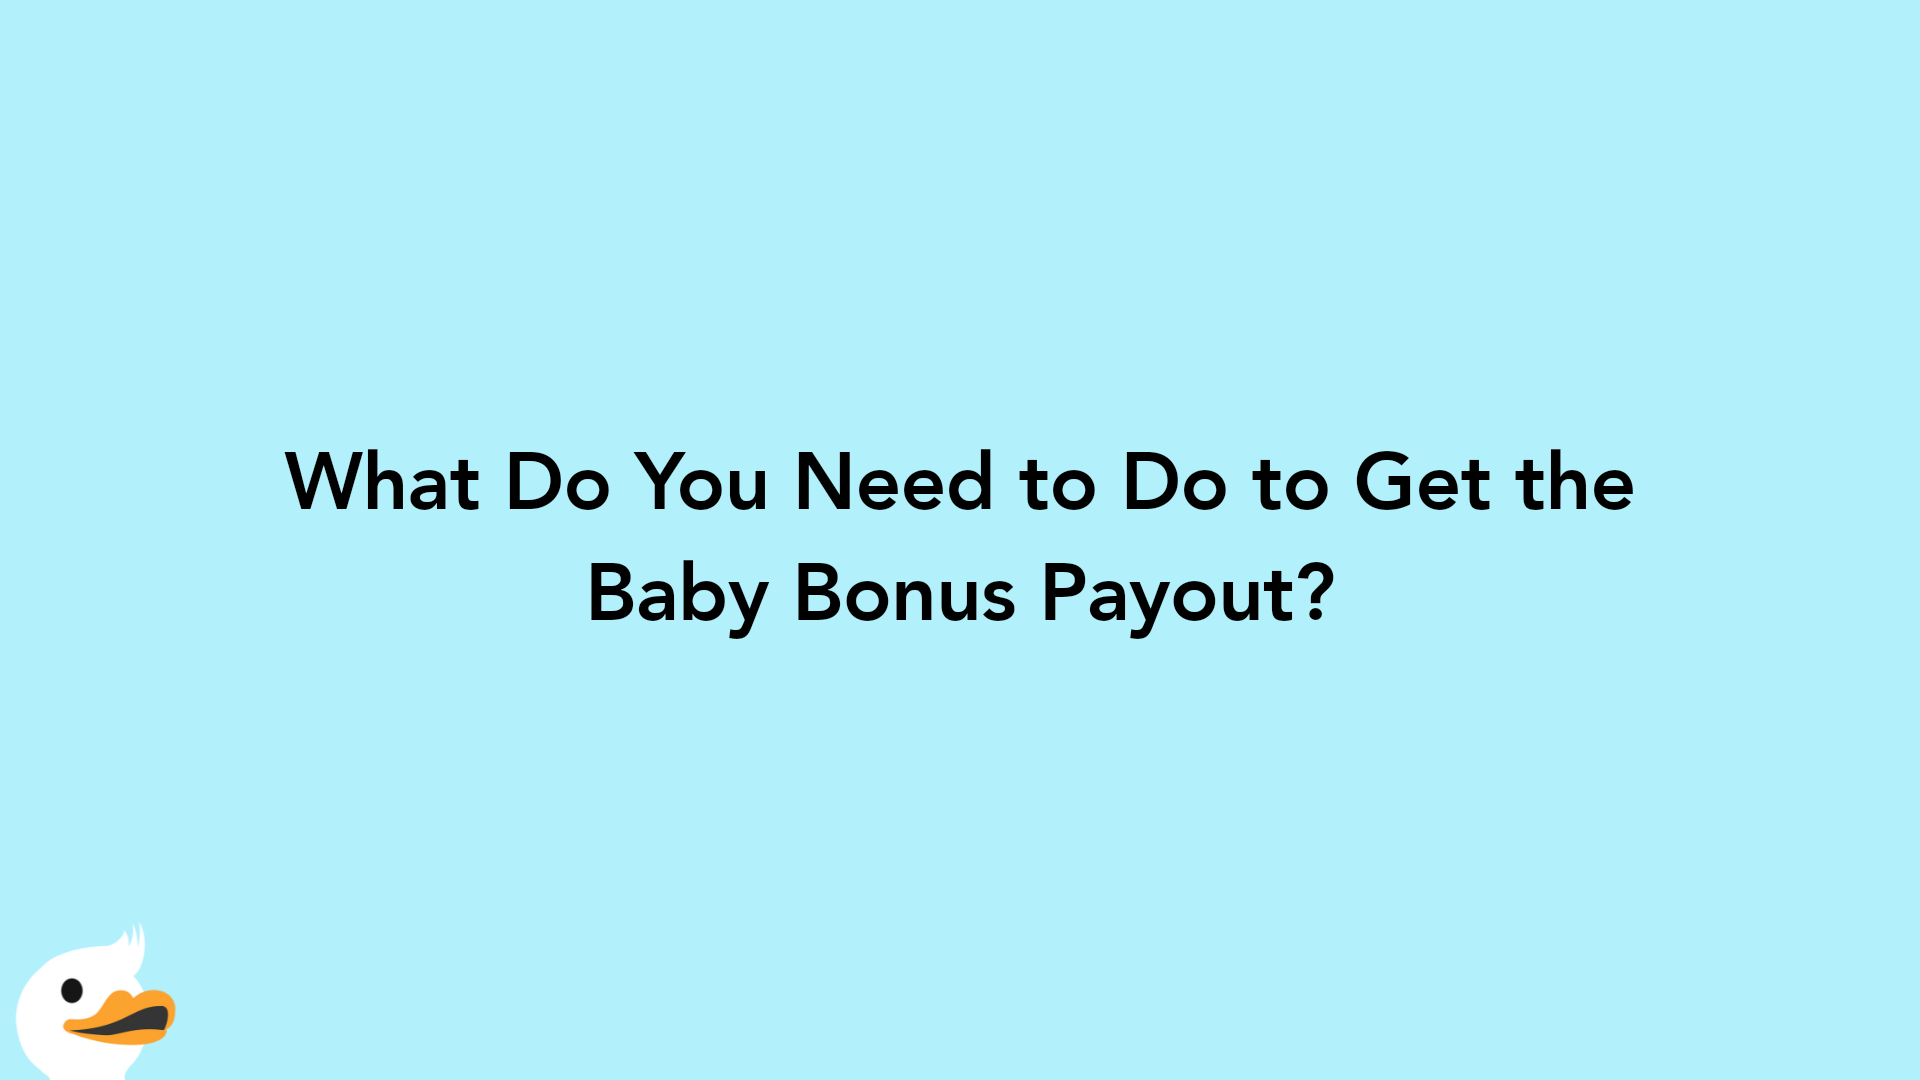 What Do You Need to Do to Get the Baby Bonus Payout?